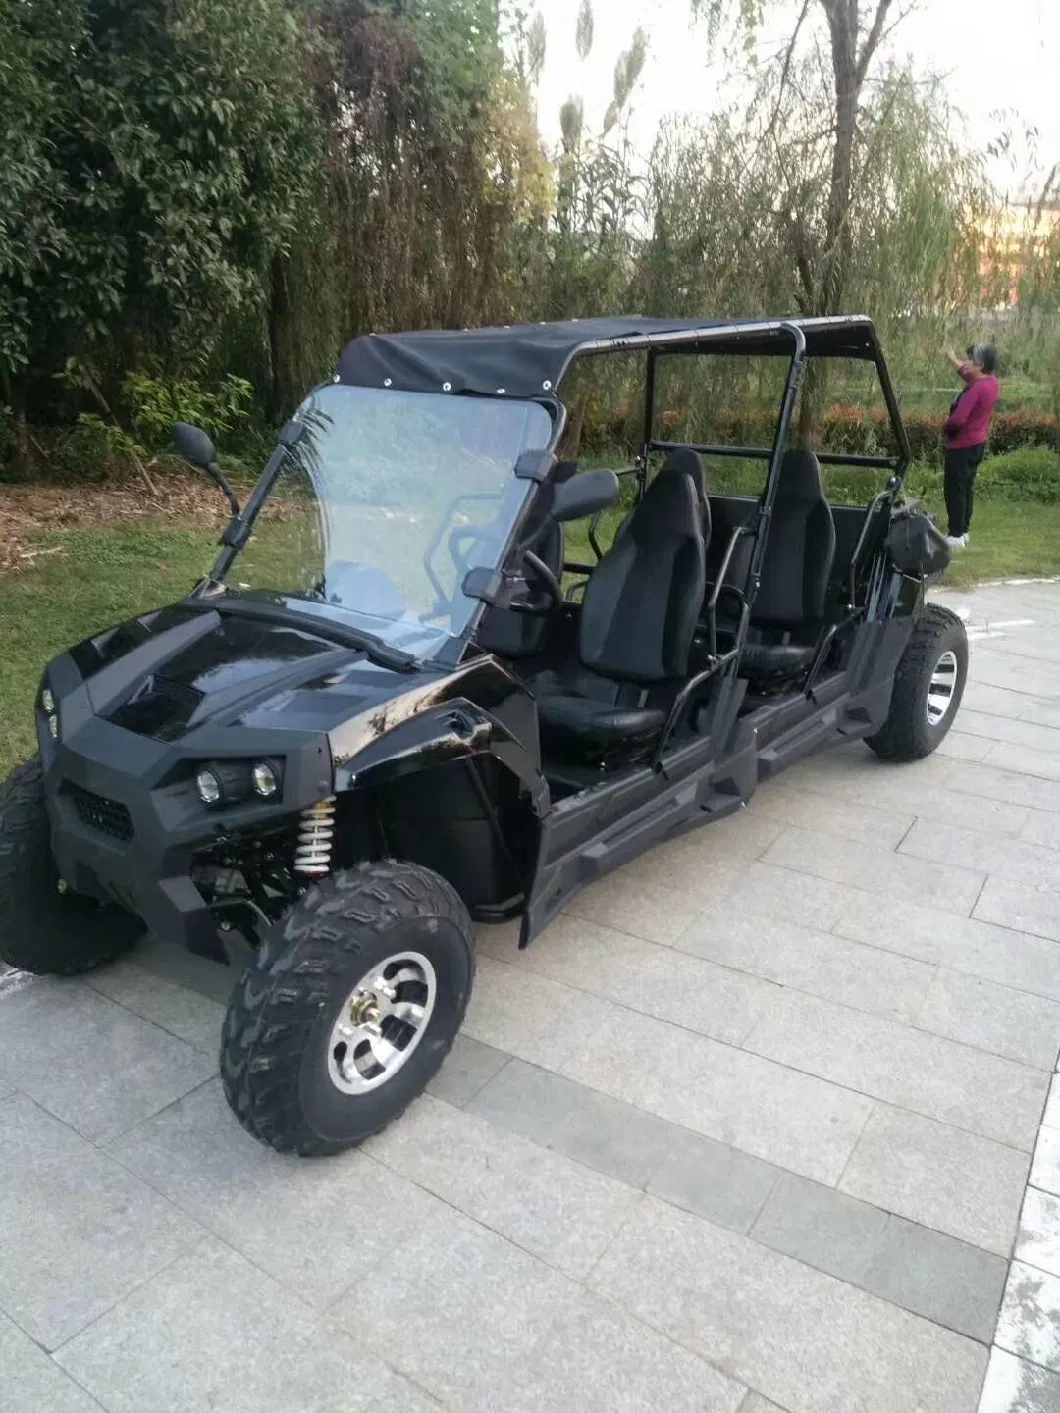 New Material Reinforced Steel Frame 60V 1800W off-Road Vehicle ATV 4X4 Electric UTV with Top10 Inch Aluminum Wheels